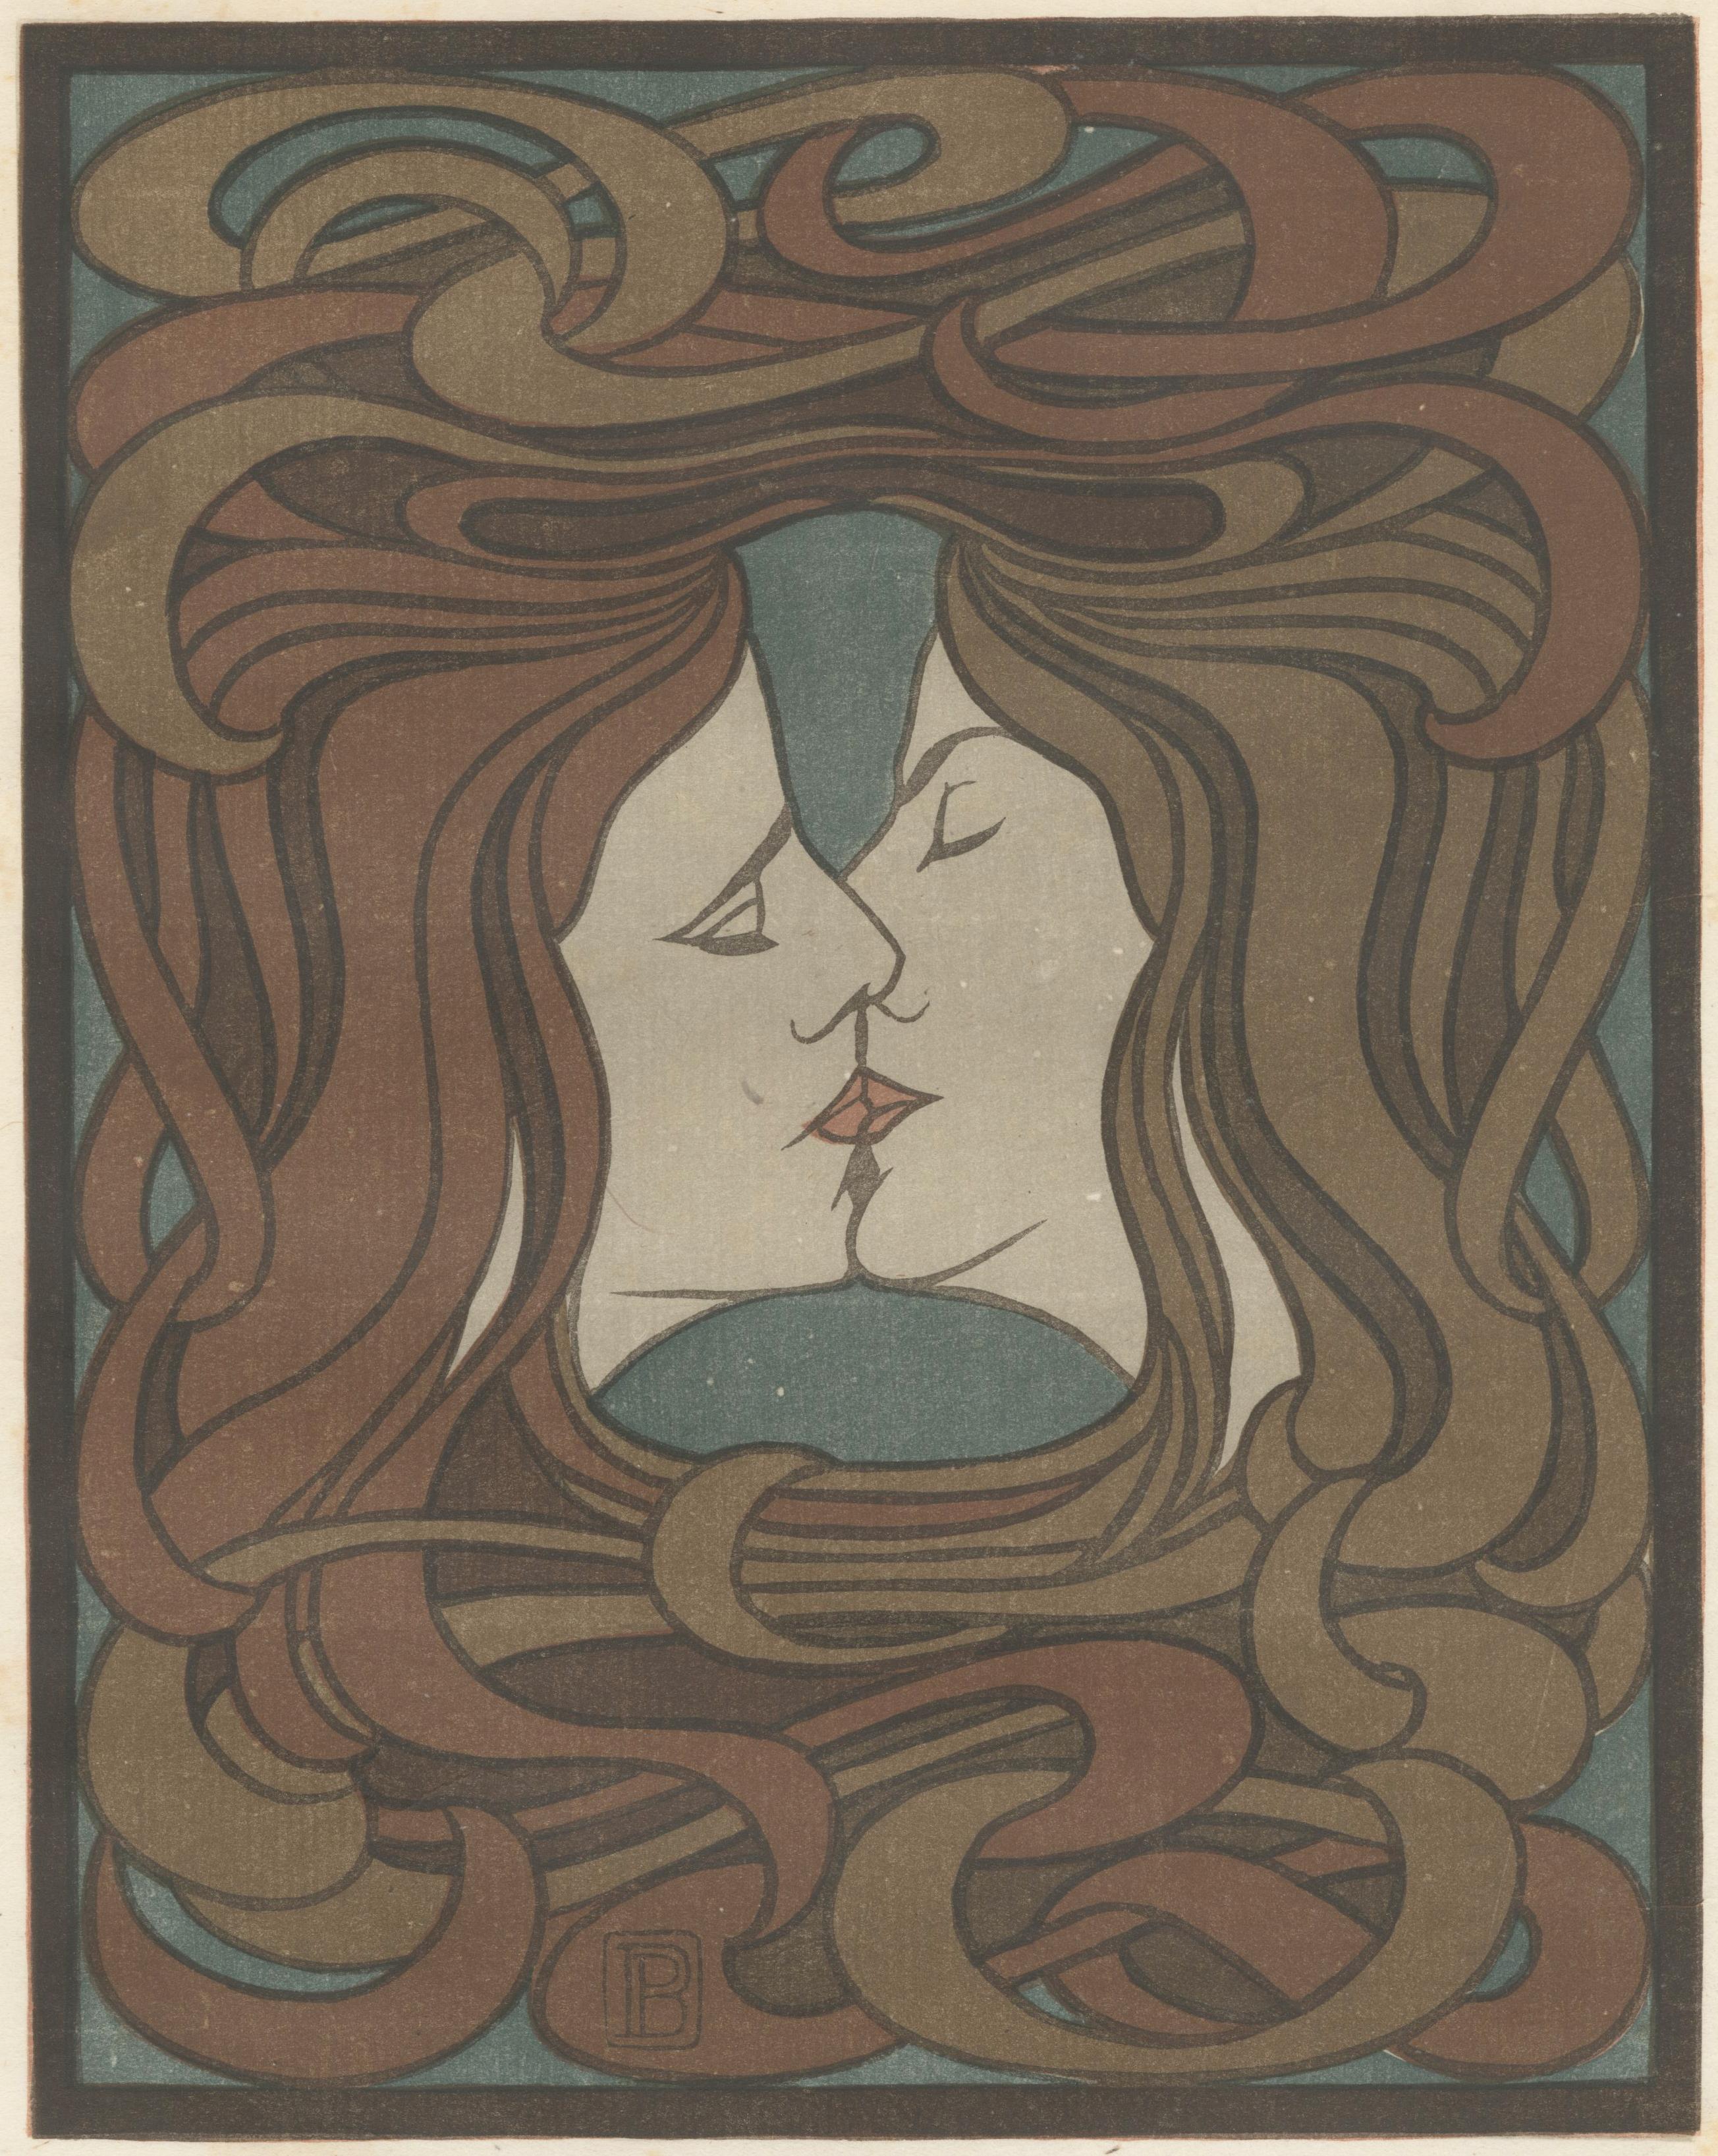 Peter Behrens  Figurative Print - Der Kuss  The Kiss (plate facing page 116)